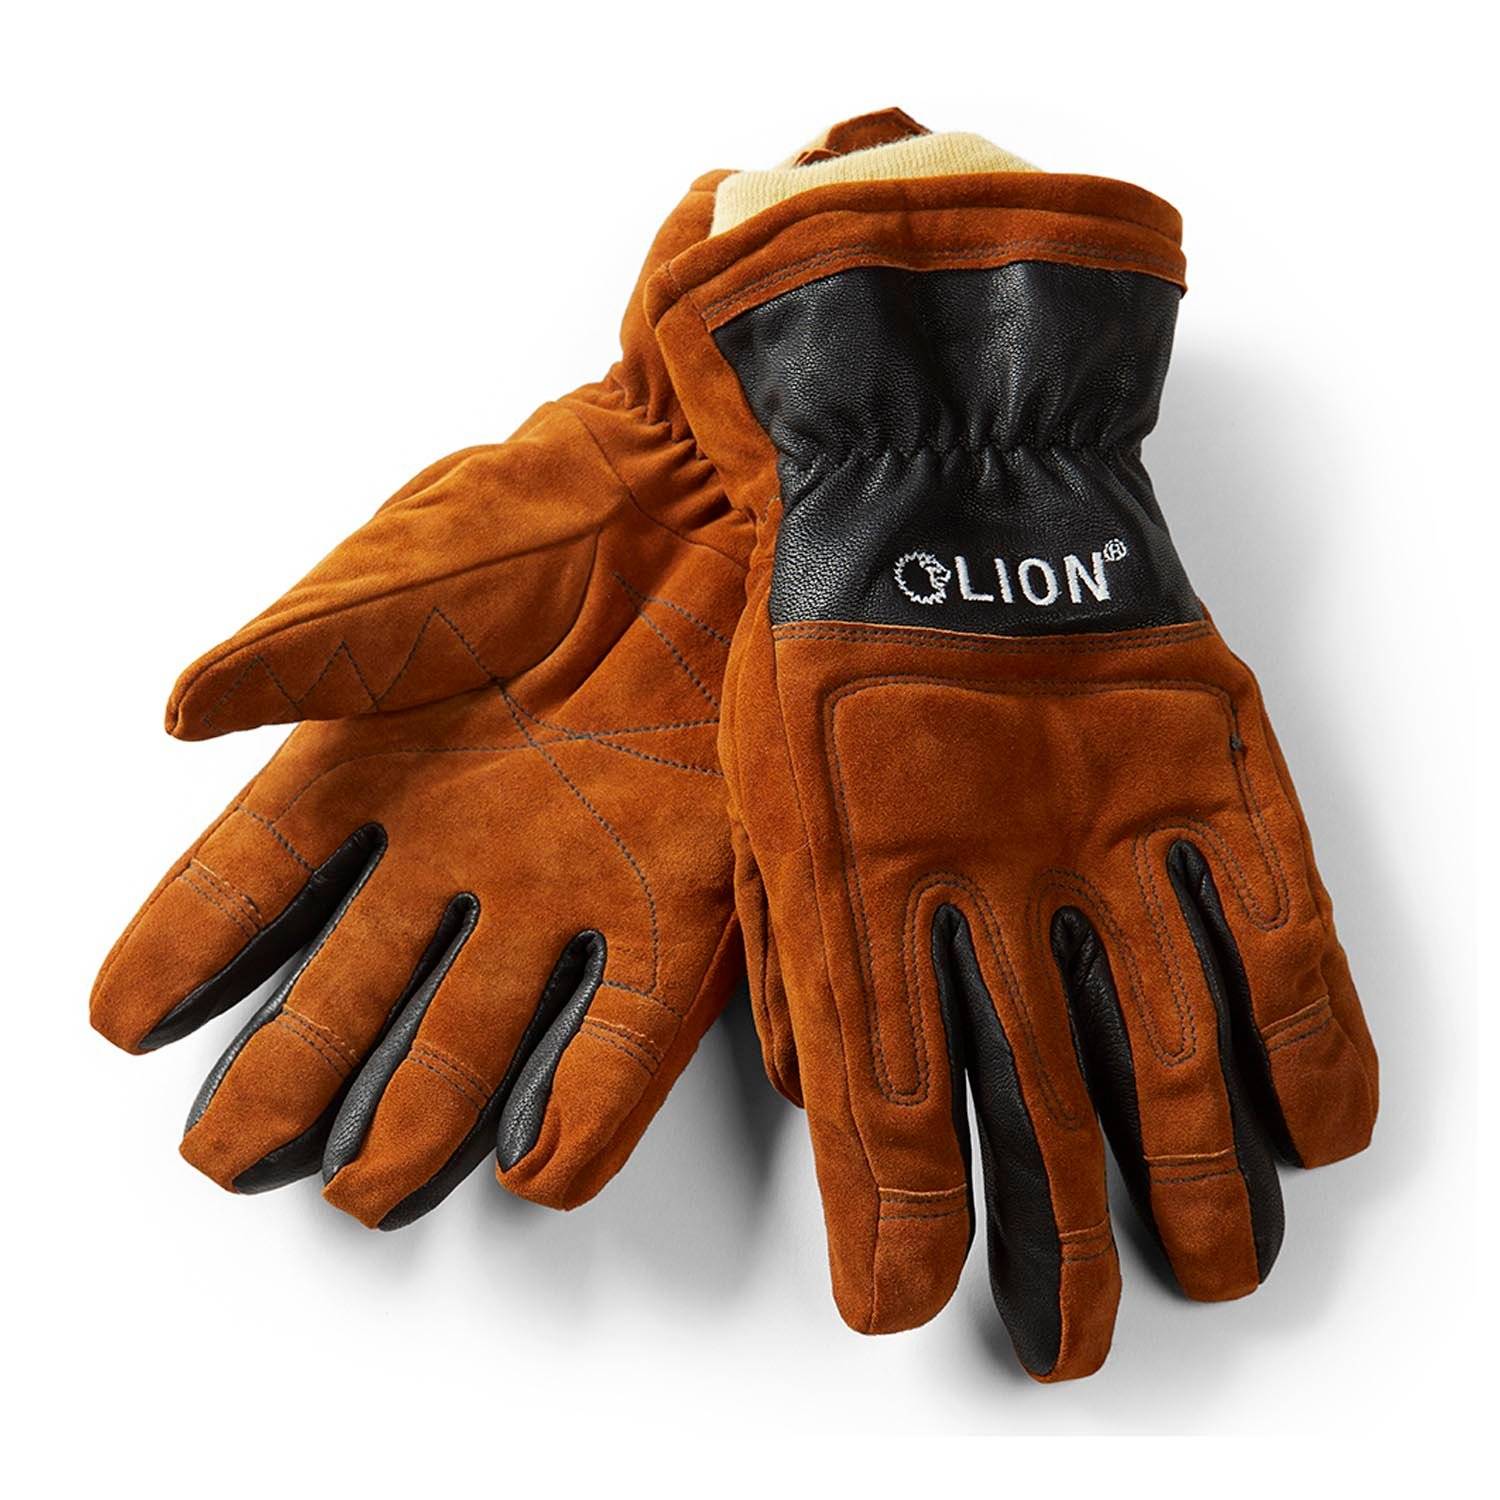 LION Victory NFPA Structural Firefighting Gloves